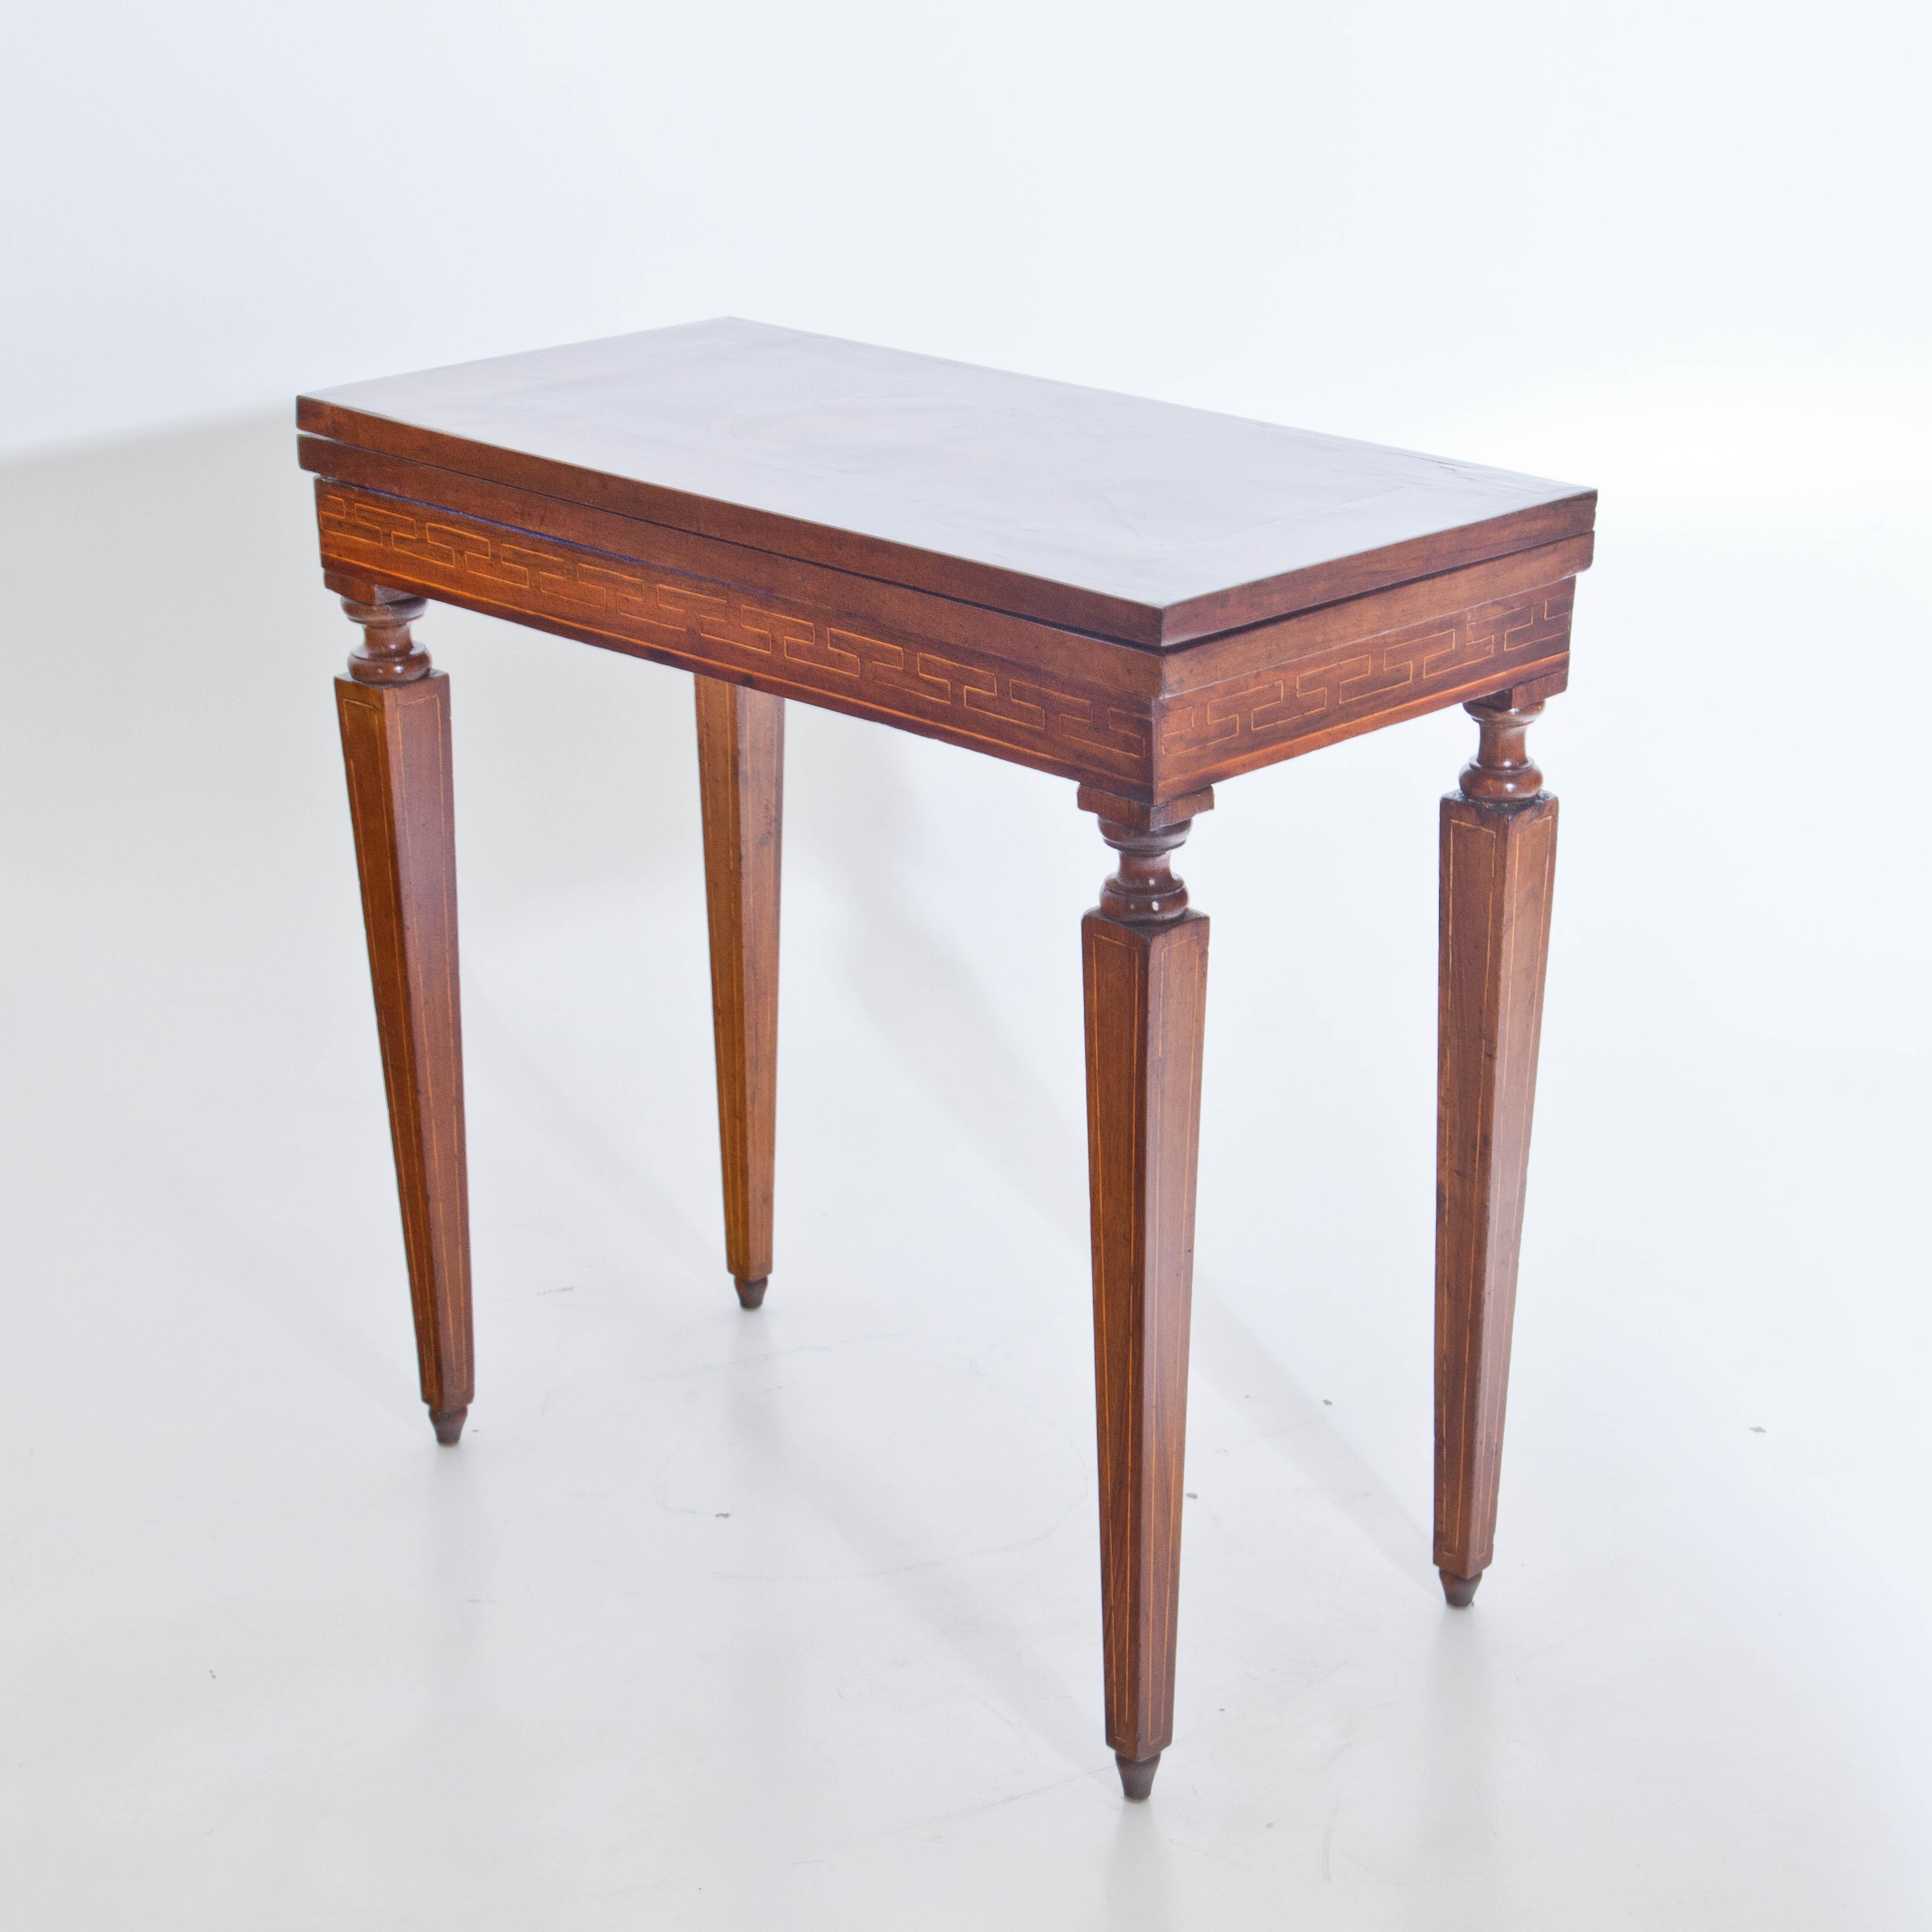 Neoclassical game table or console table on square pointed feet with thread inlays and meander band decoration on the rail. The folding and rotating tabletop is inlaid inside and out. Restored condition, while keeping the old patina.
        